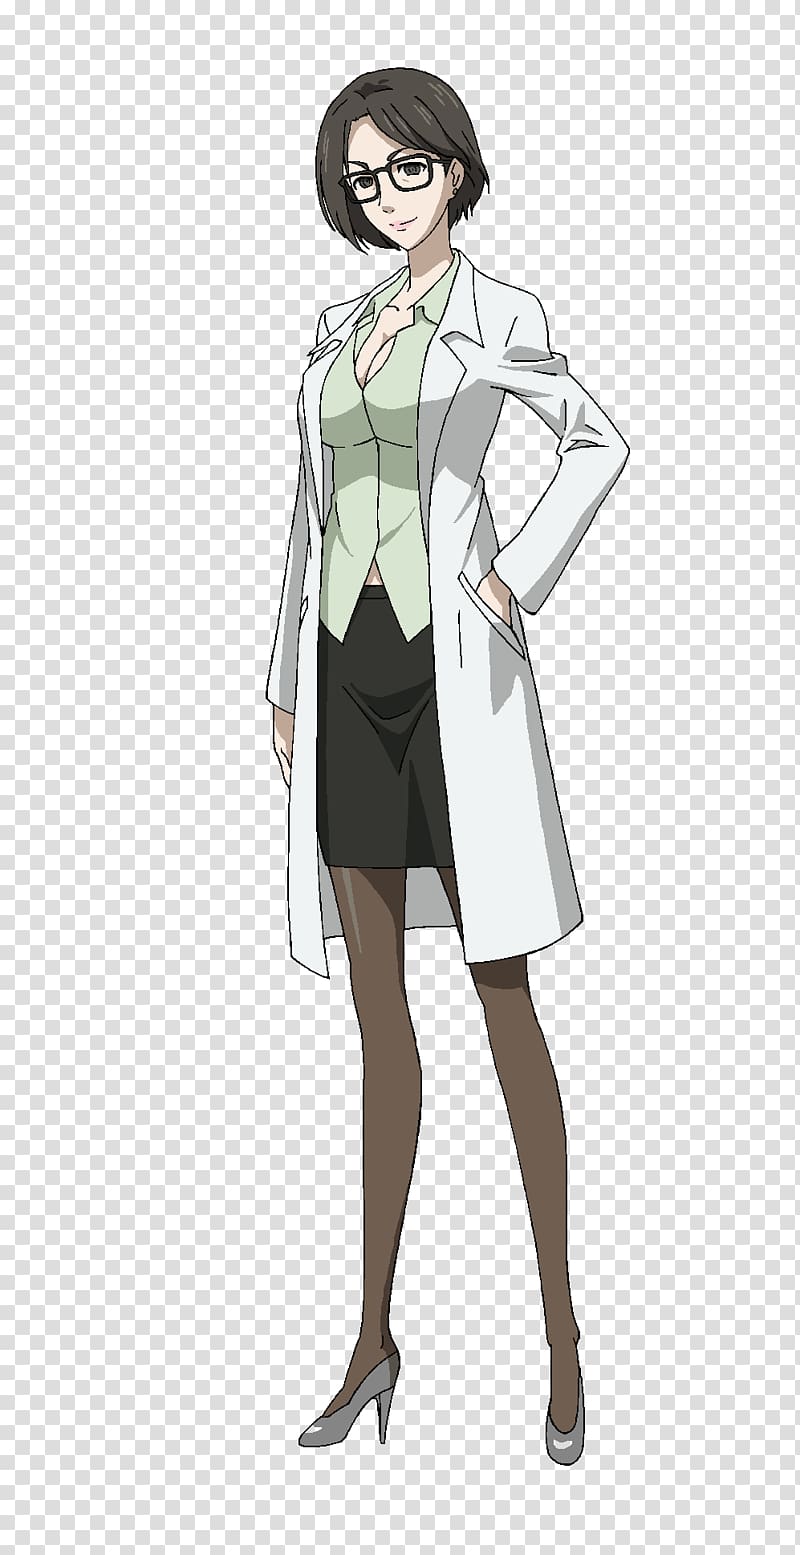 Steins;Gate 0 Anime Tokyo MX Character, SteinsGate transparent background PNG clipart